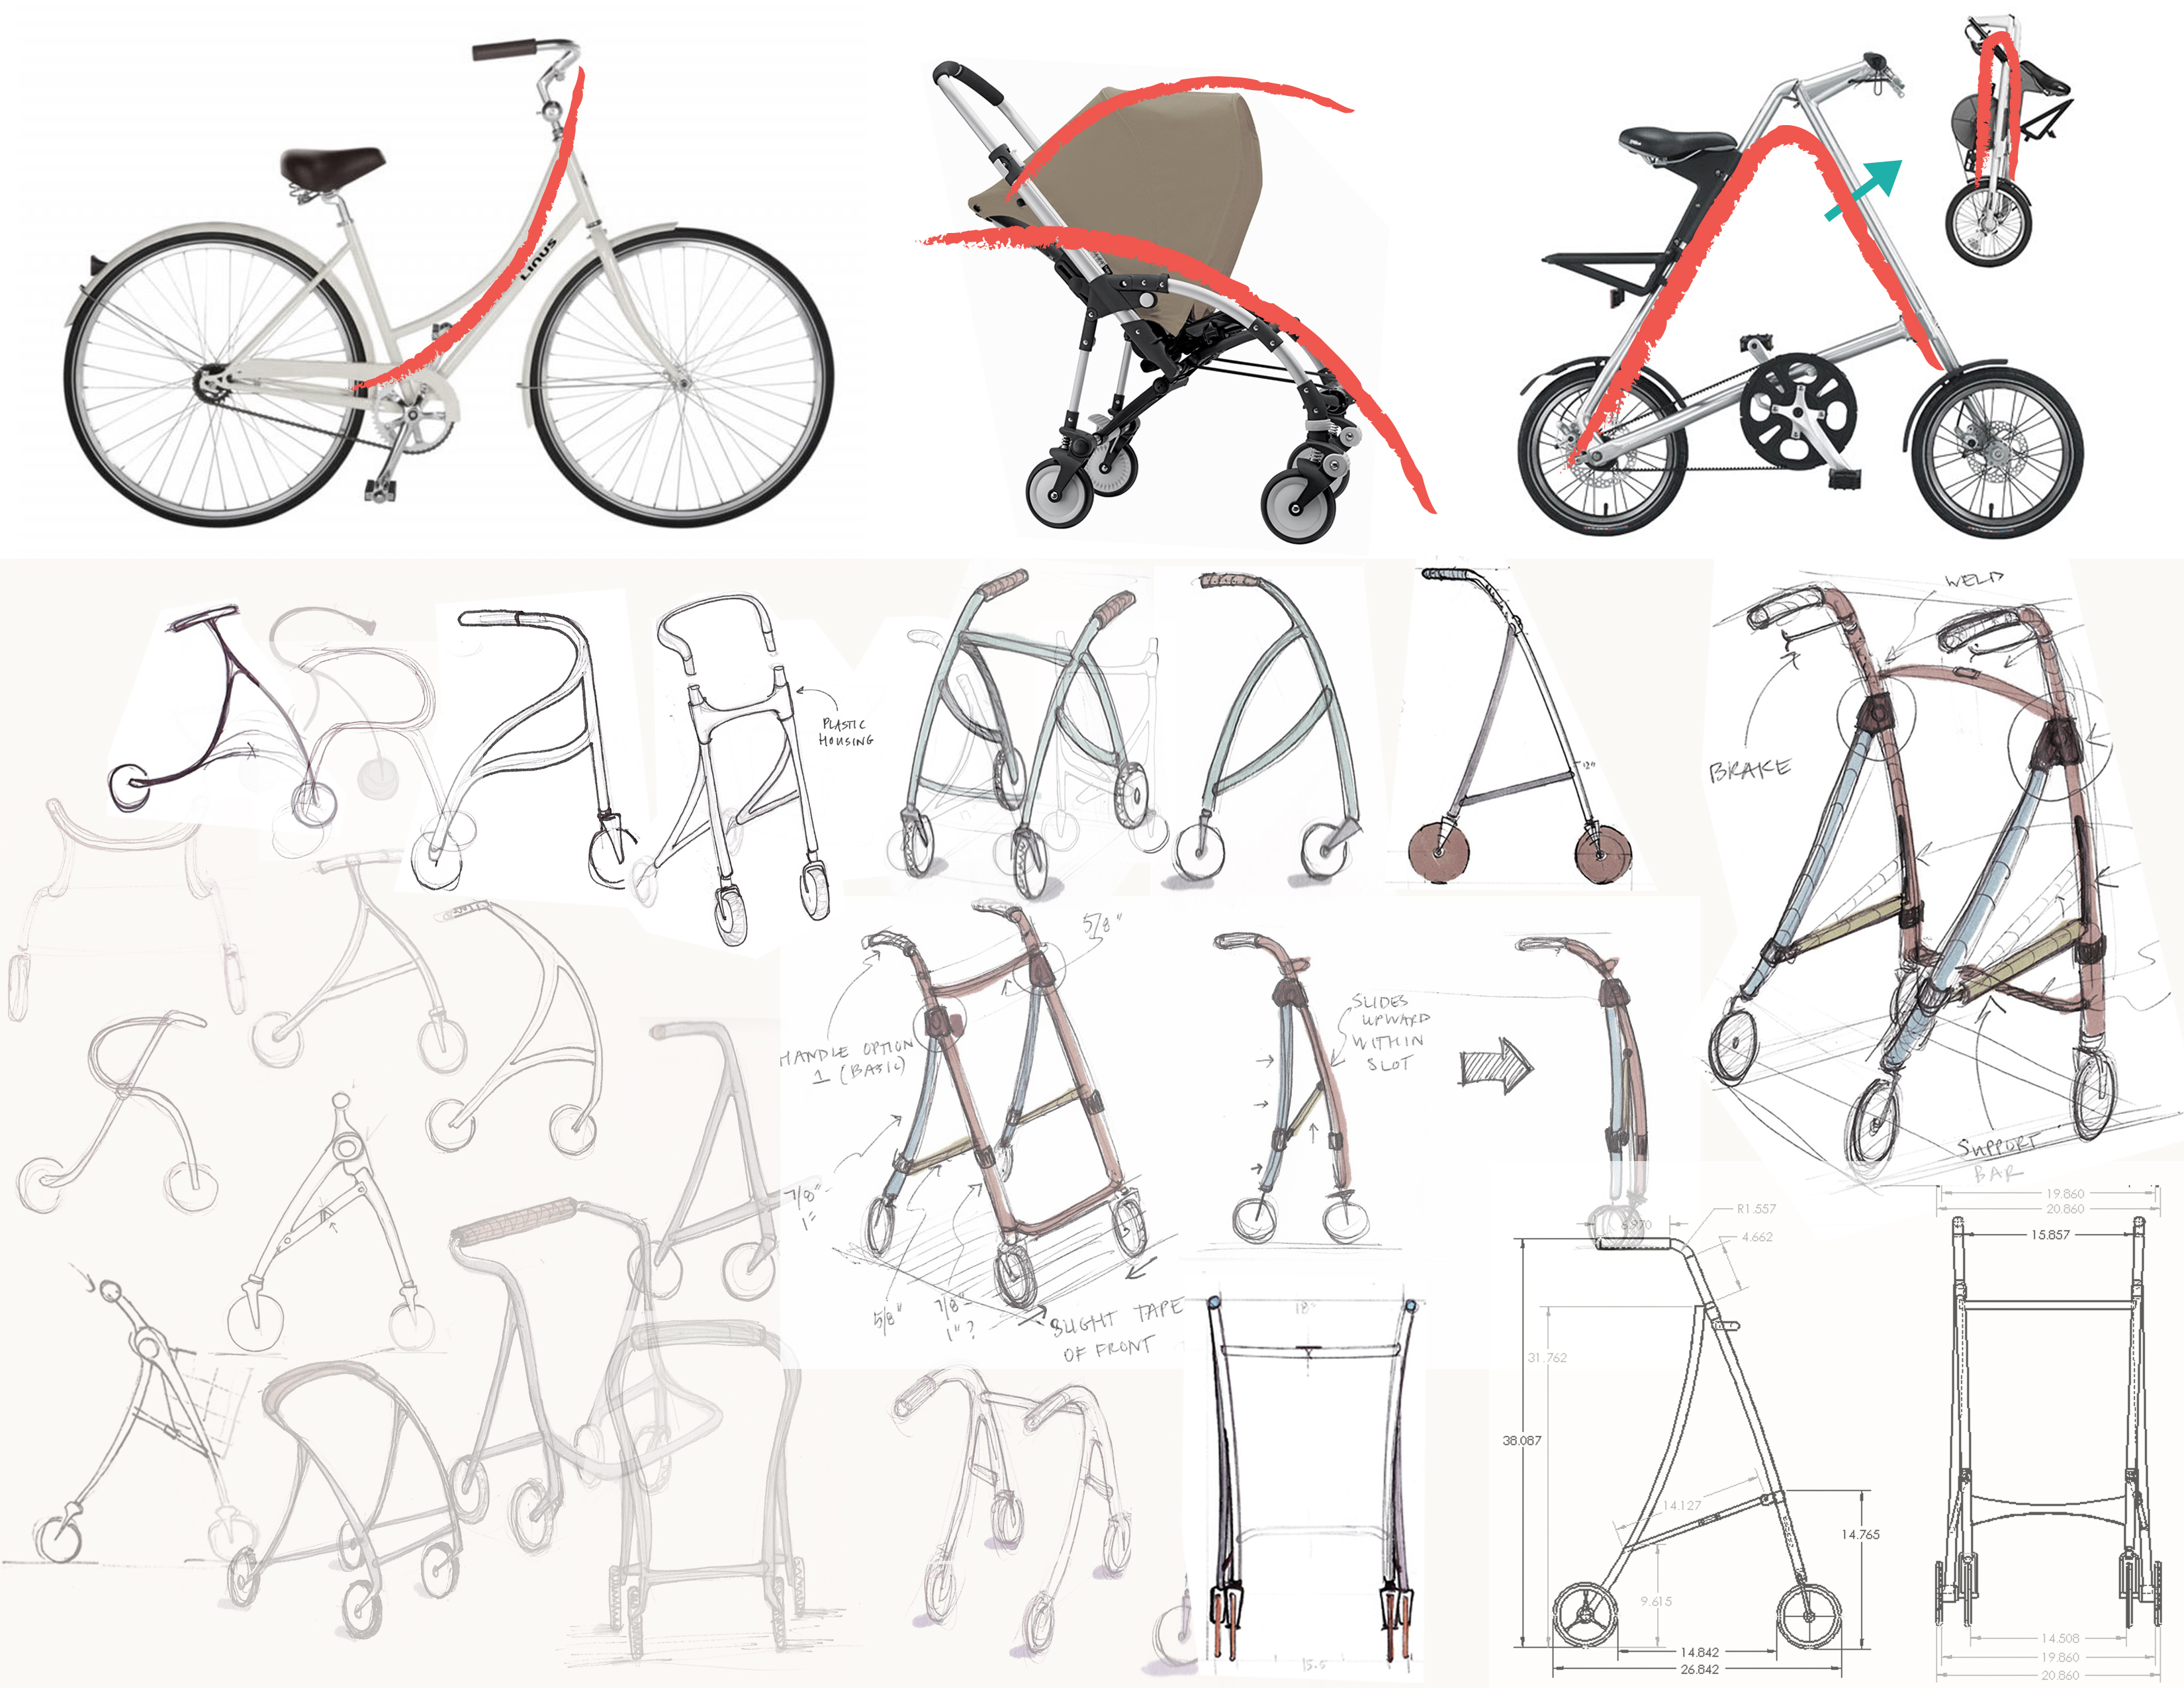 A drawing with 2 dozen or so sketches and images of wheeled gear, with directional red lines indicating their axes of movement. Bikes, strollers and all forms of walker prototypes.